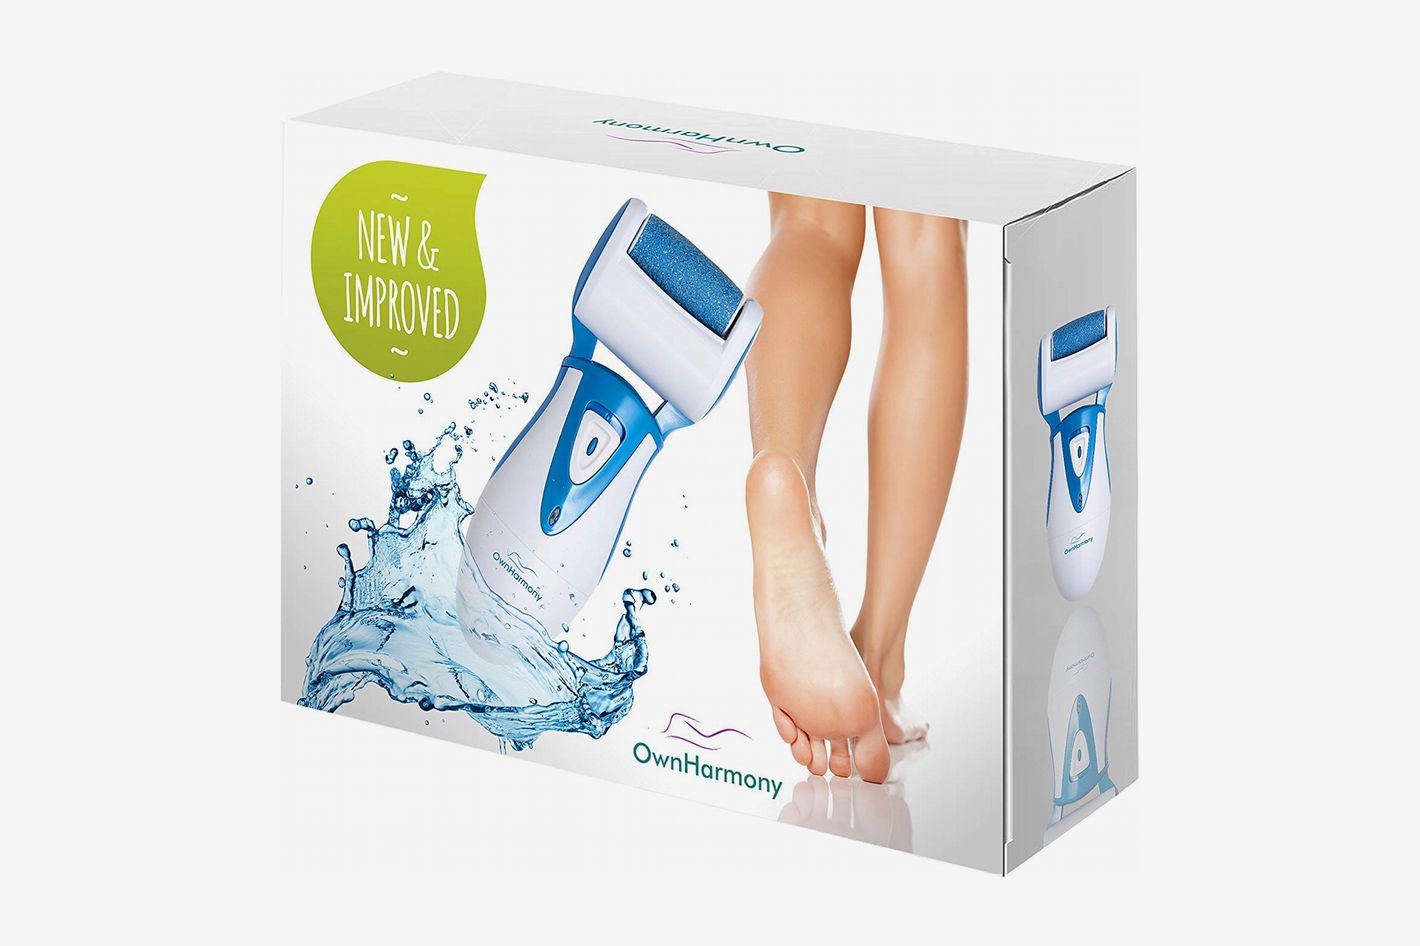 Highly-Rated Callus Removers For Your Feet